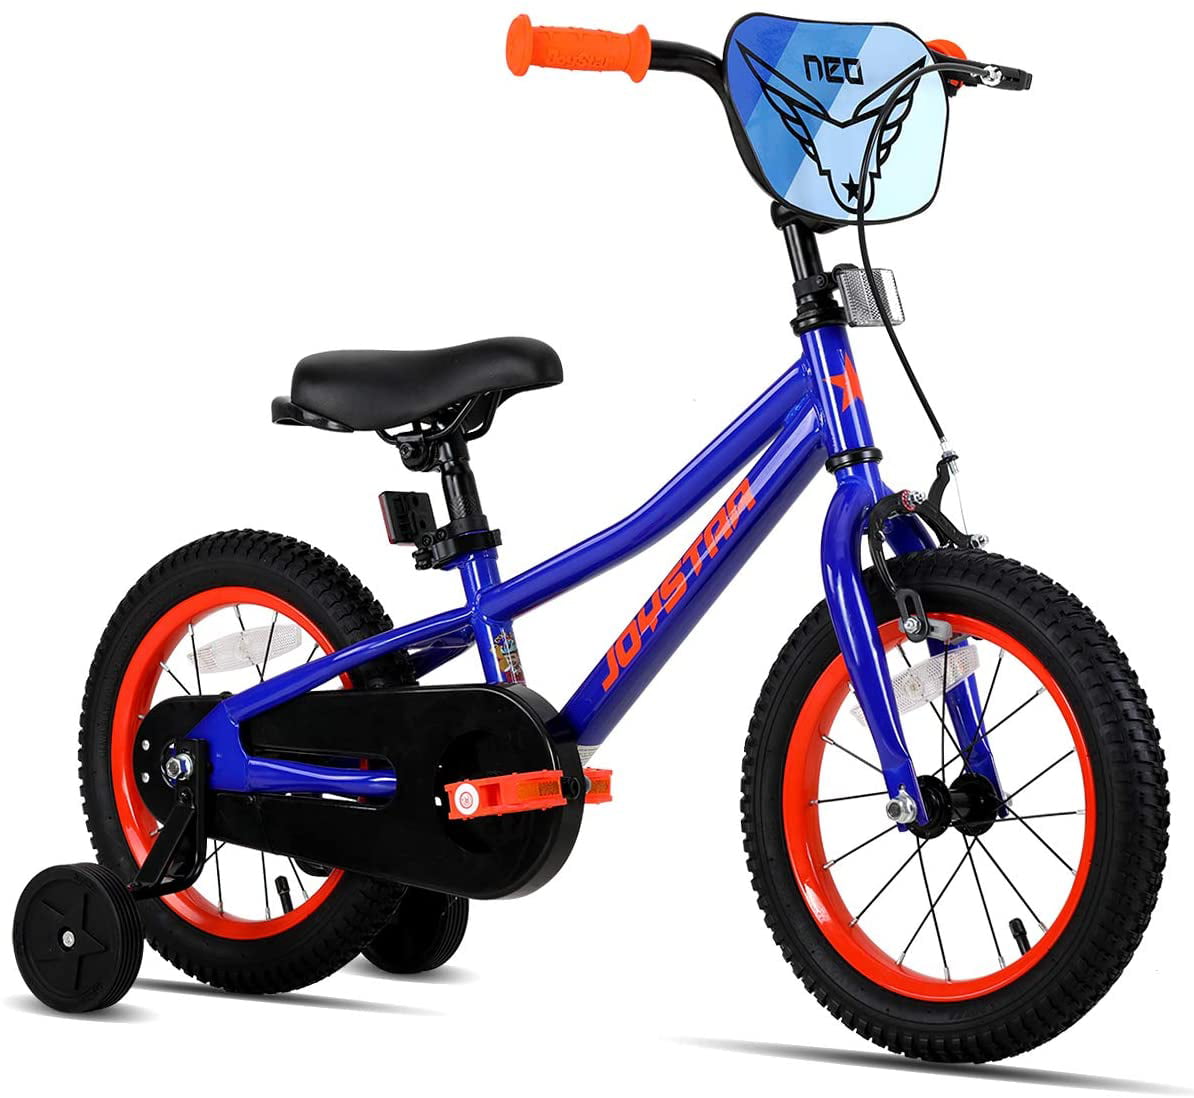 JOYSTAR NEO Kids Bike for 3-10 Years Old 12 14 16 18 20 Inch Kids Junior Bicycle with Front Caliper Brake & Training Wheels for Boys & Girls Black Pink Blue